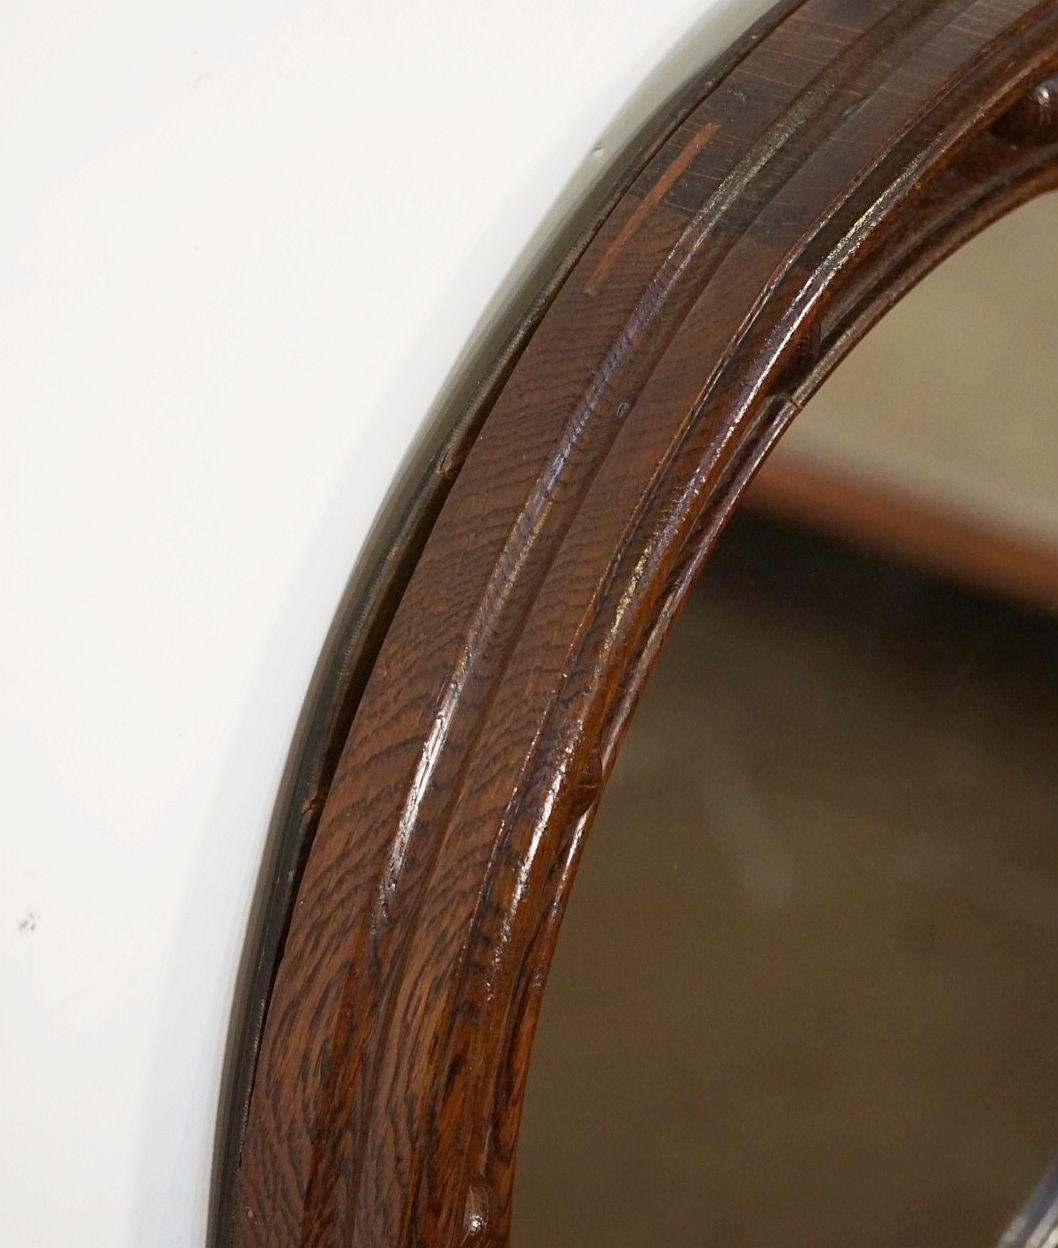 Regency Style Round Mirror with Oak Wood Frame from England (Diameter 16 1/2)  For Sale 6